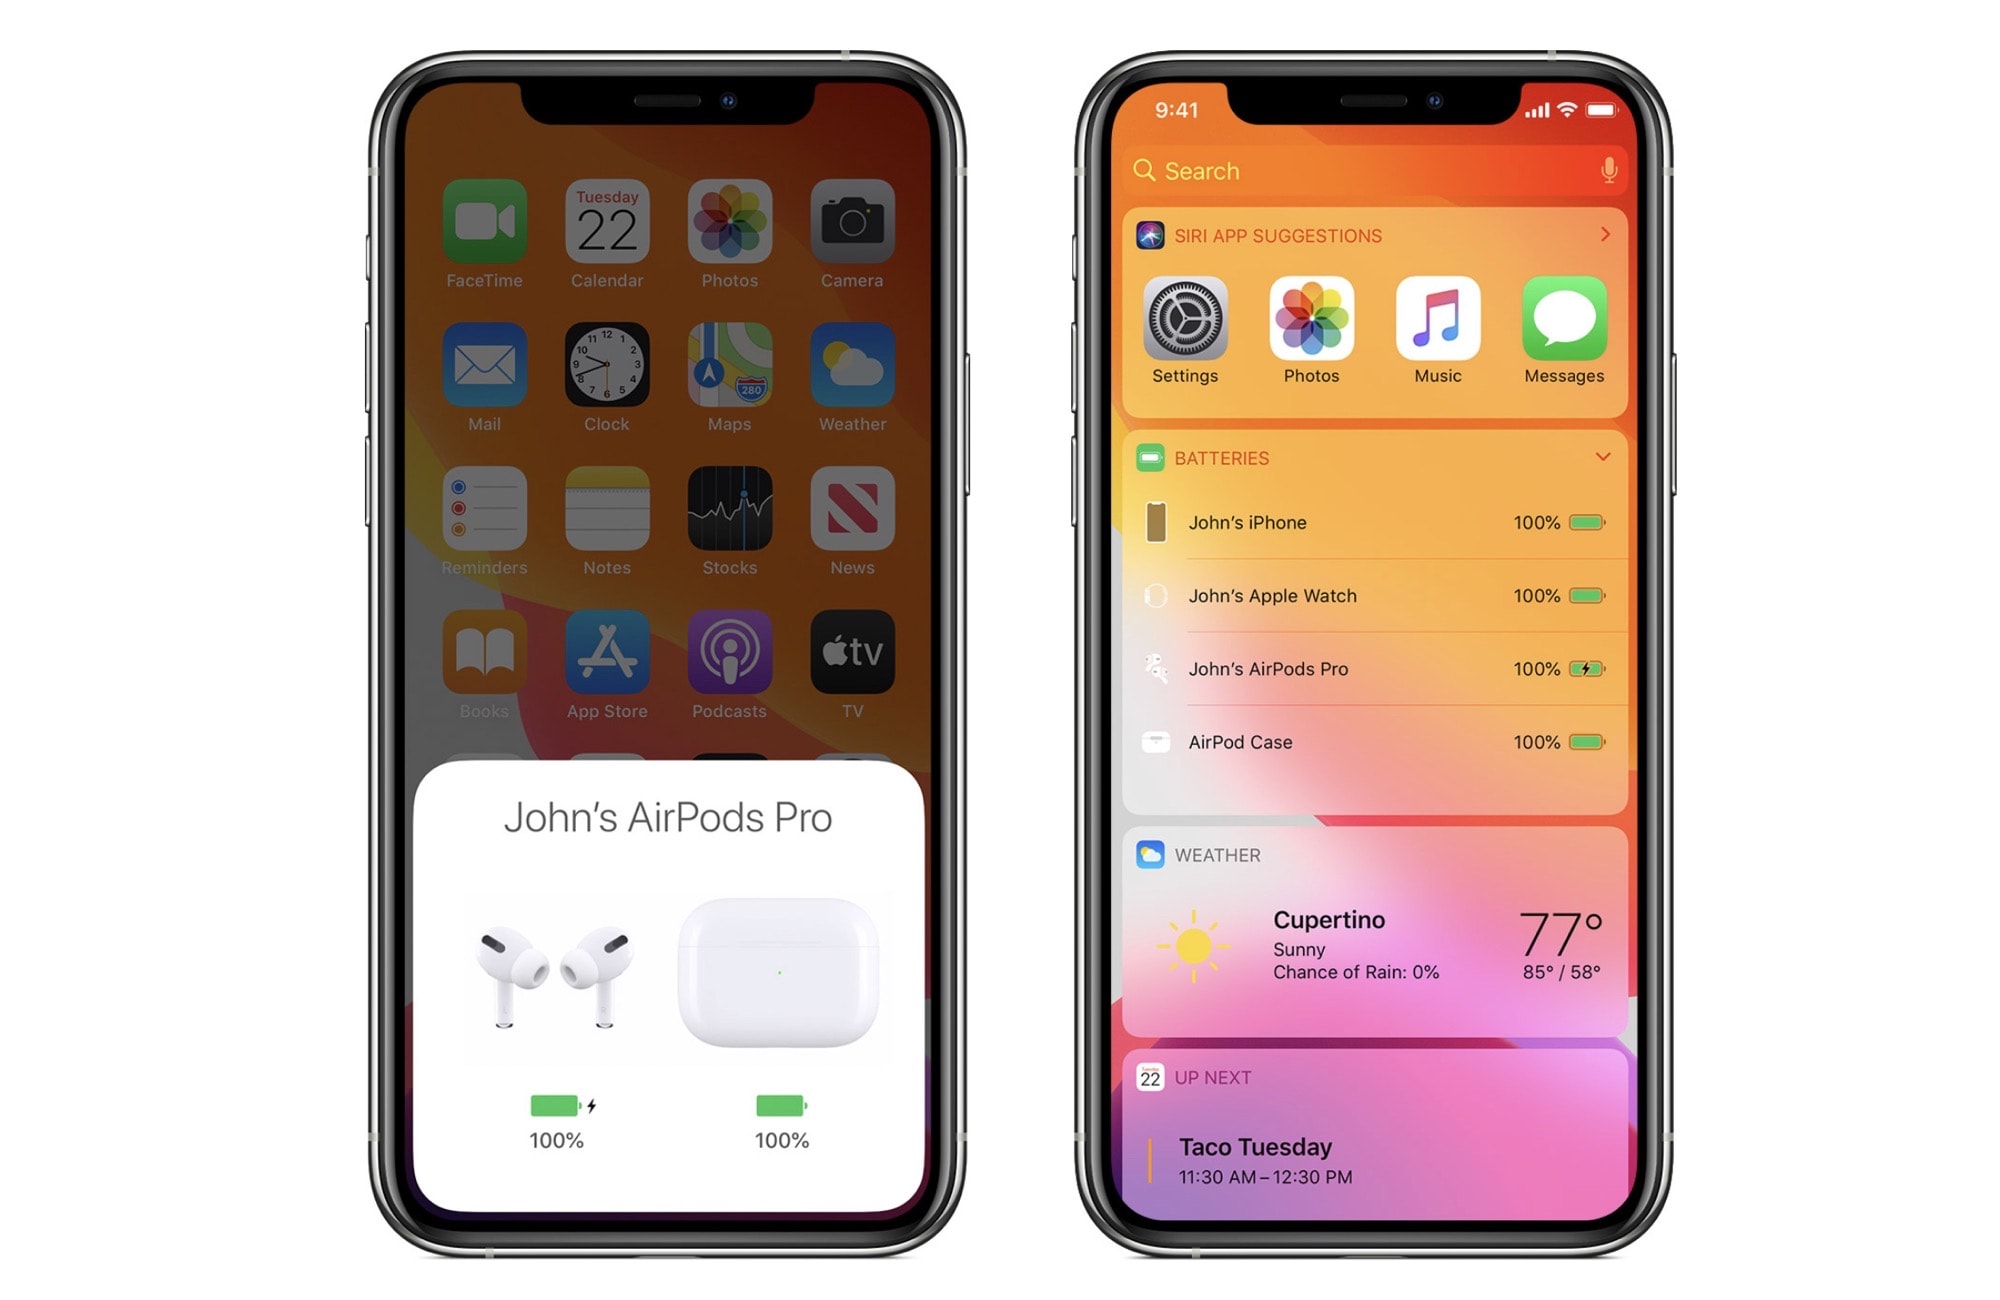 Check AirPods Pro battery levels from the iPhone. 